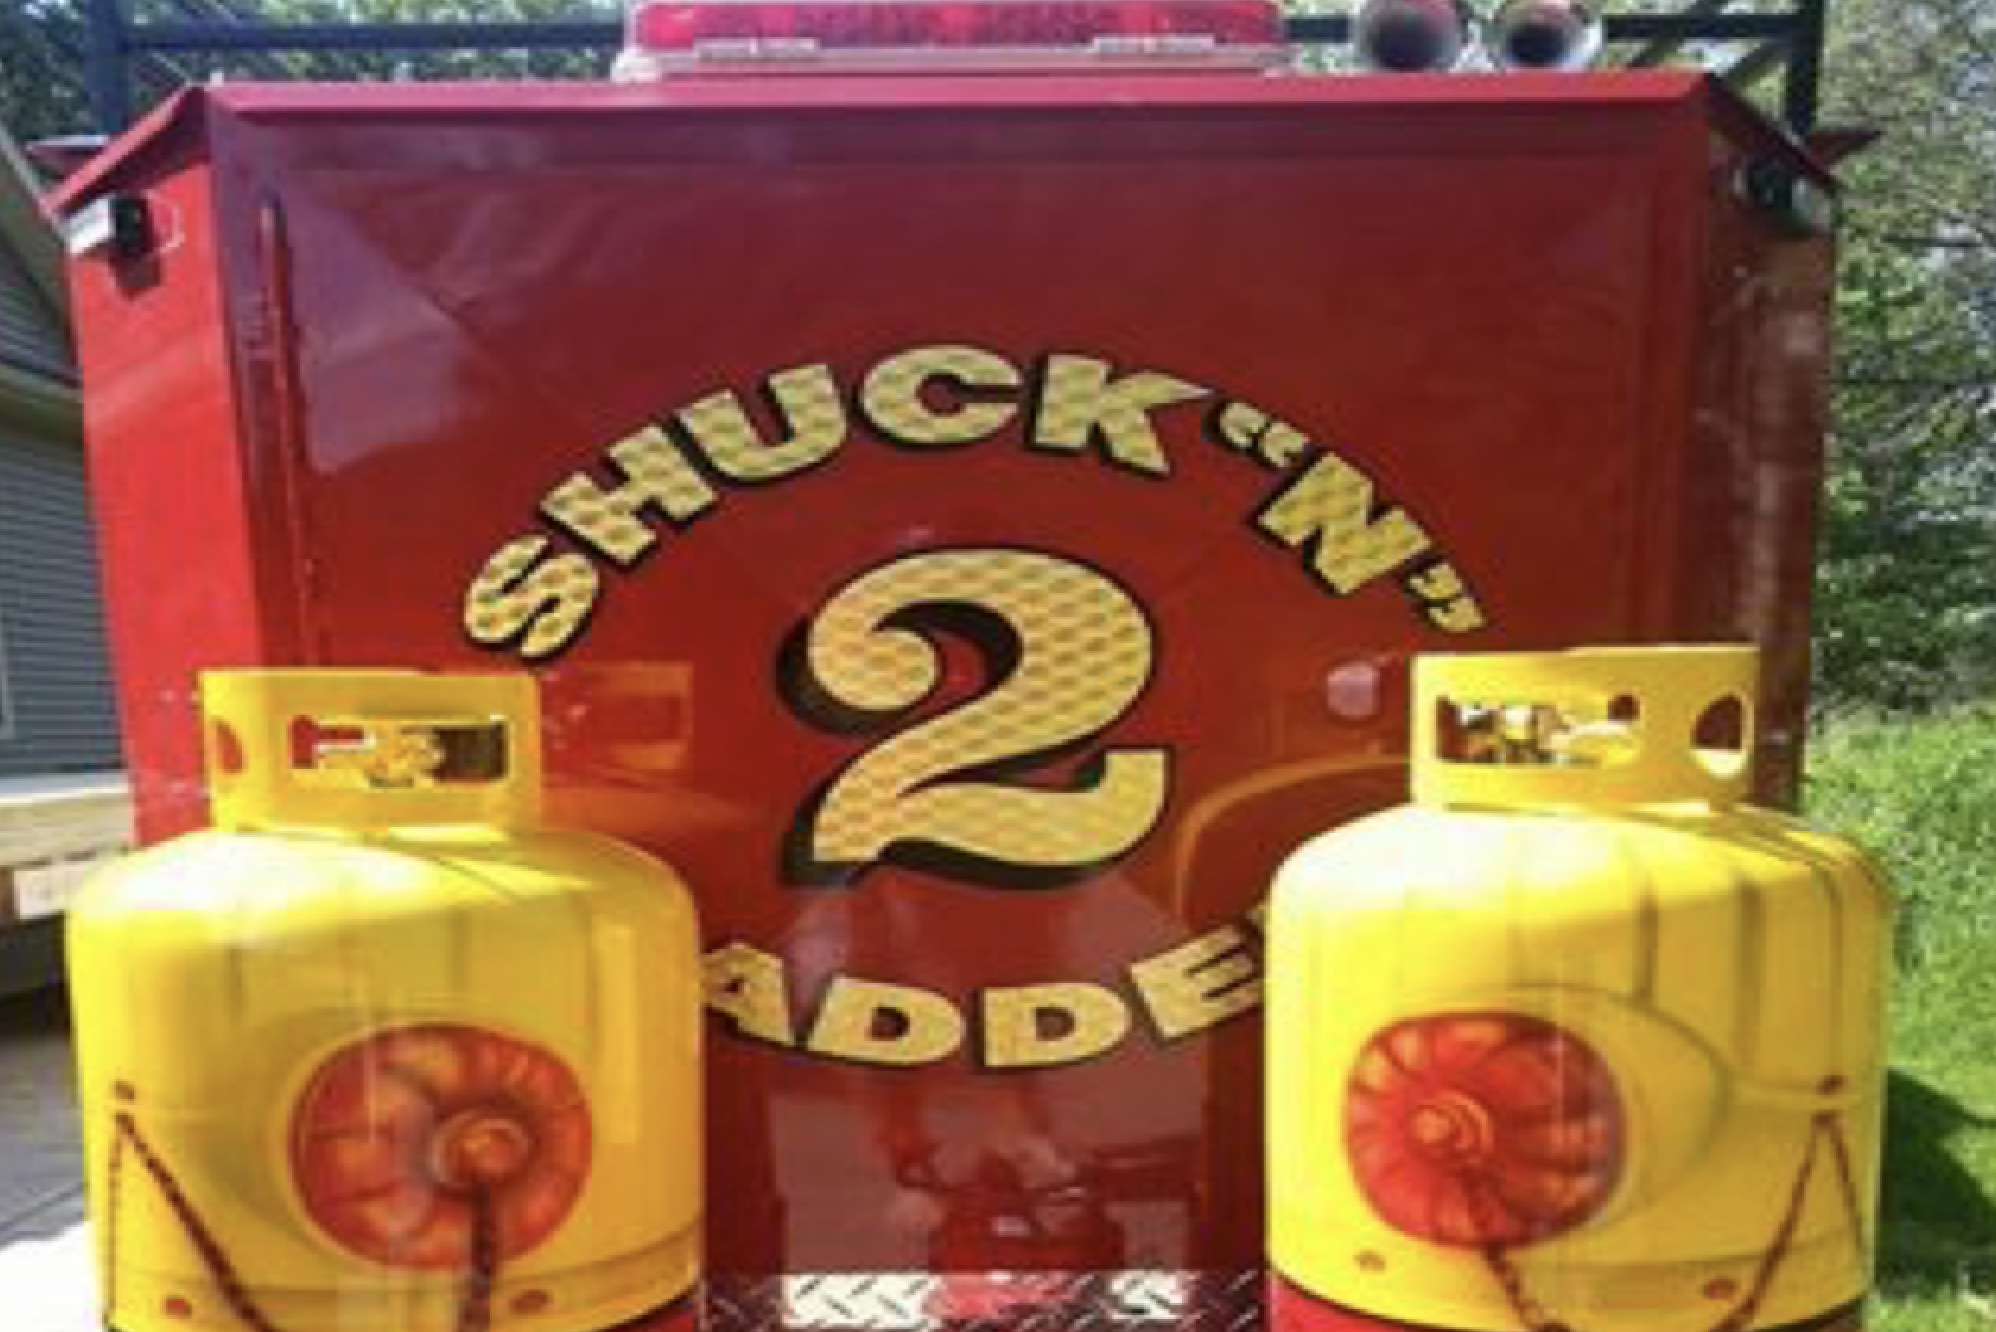 A red and yellow Texas corn-roasting machine, lovingly named “Shuck’n Ladder #2”